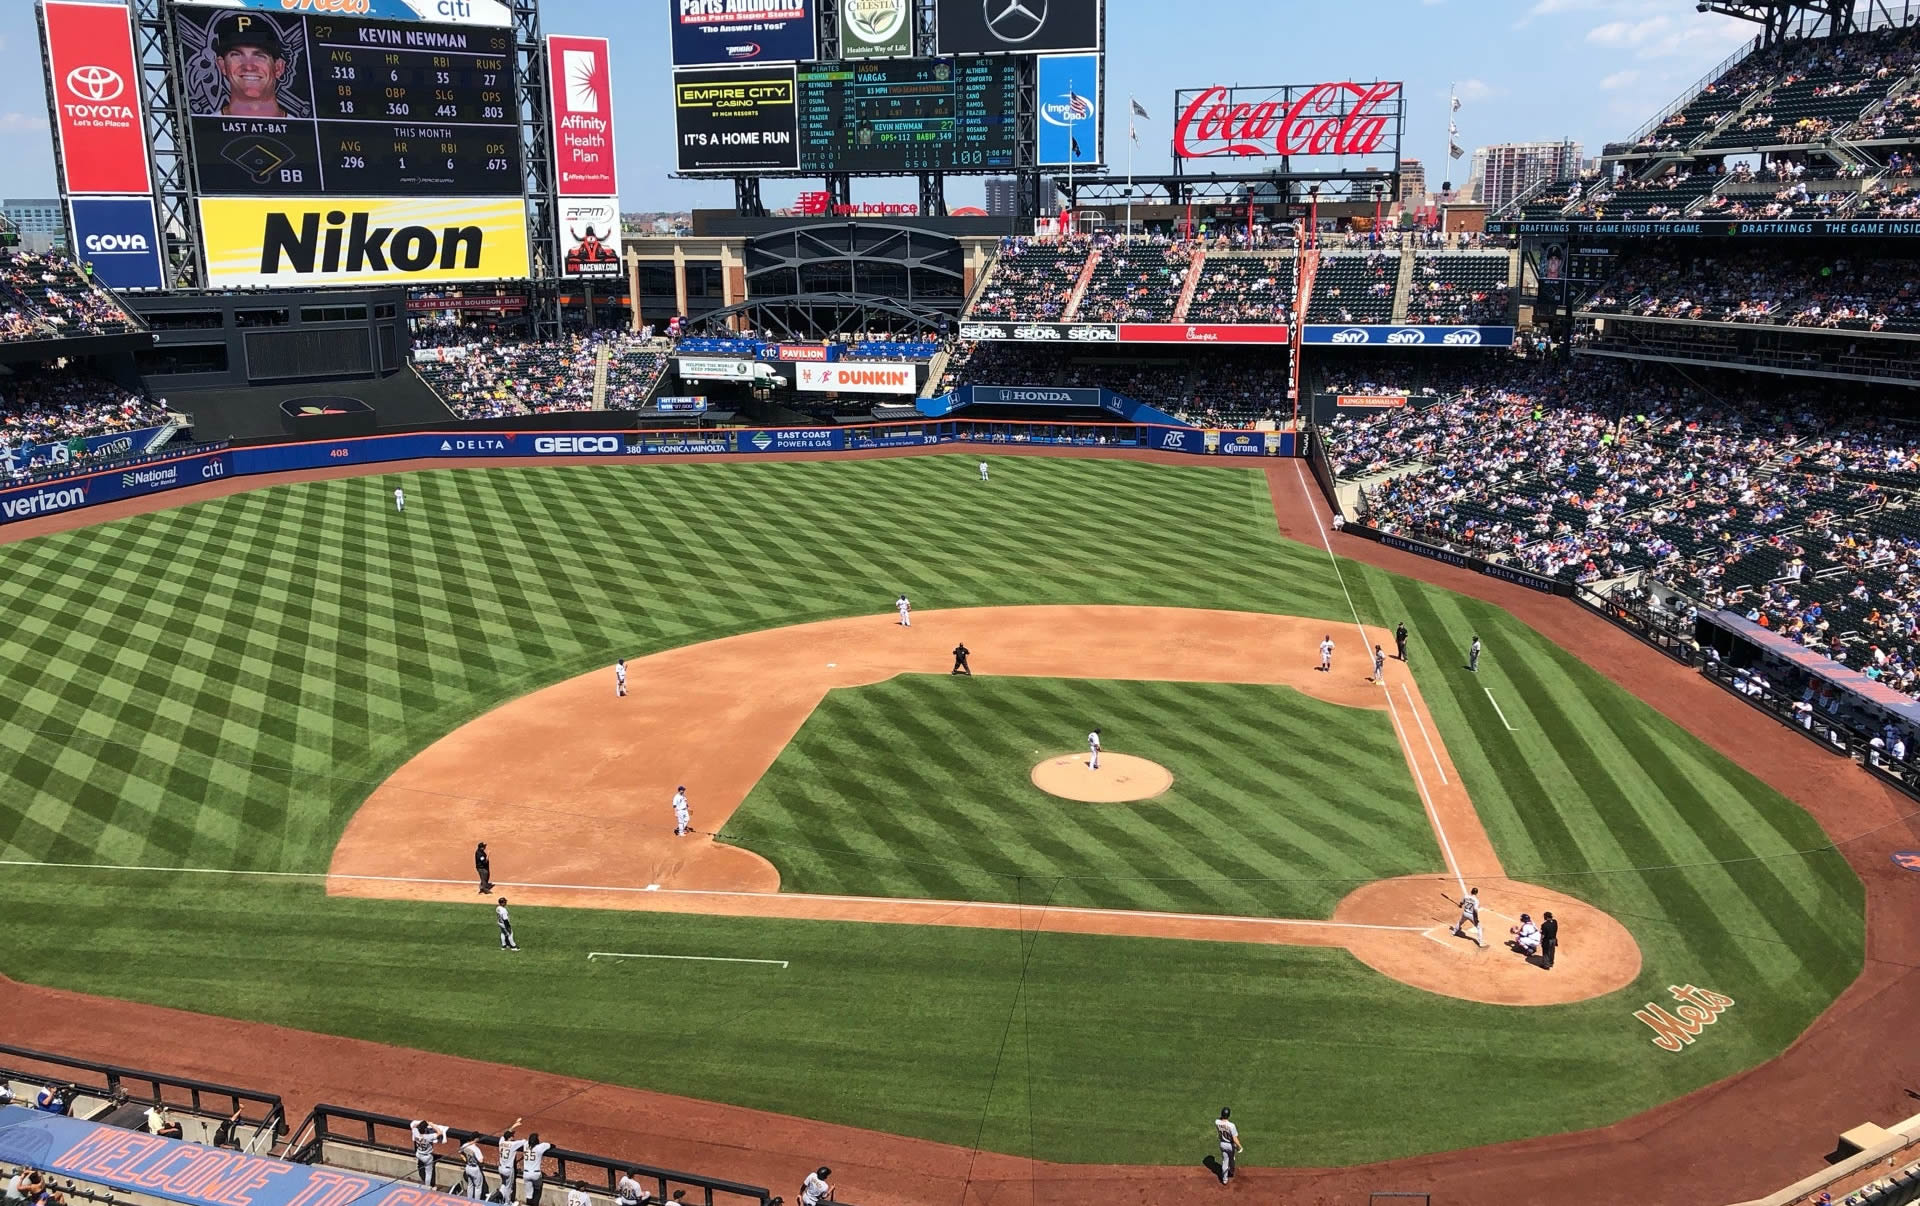 section 420, row 1 seat view  - citi field